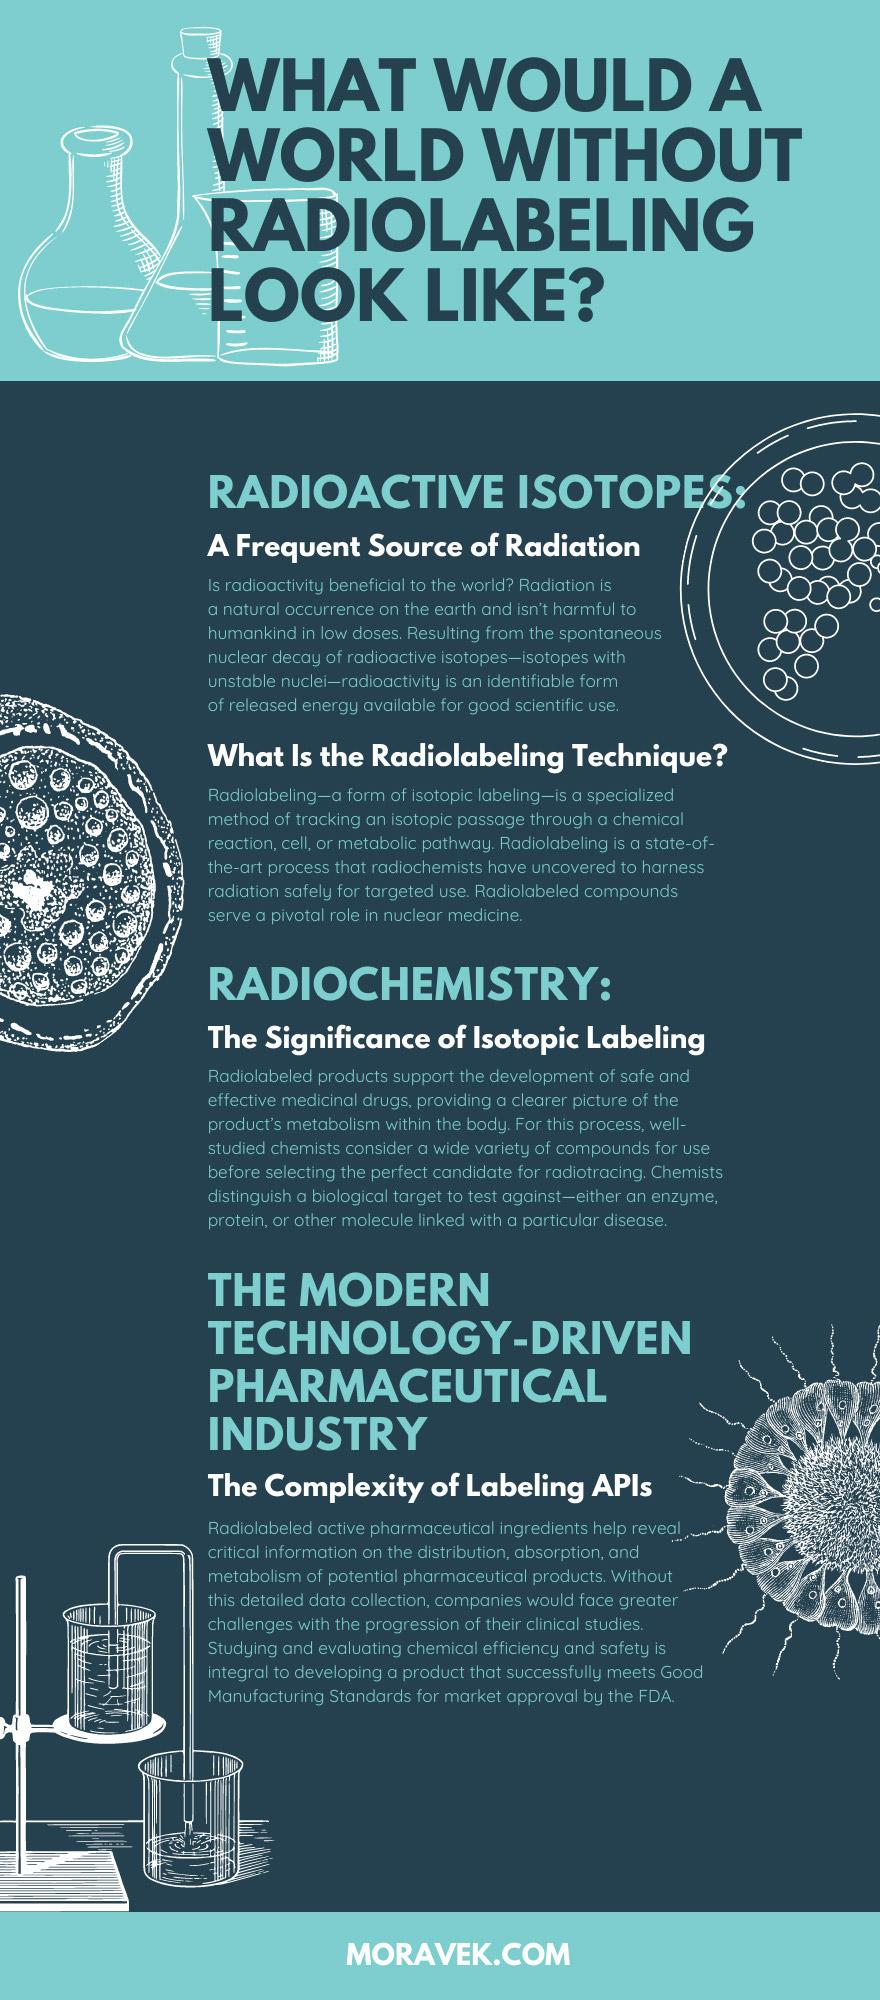 What Would a World Without Radiolabeling Look Like?